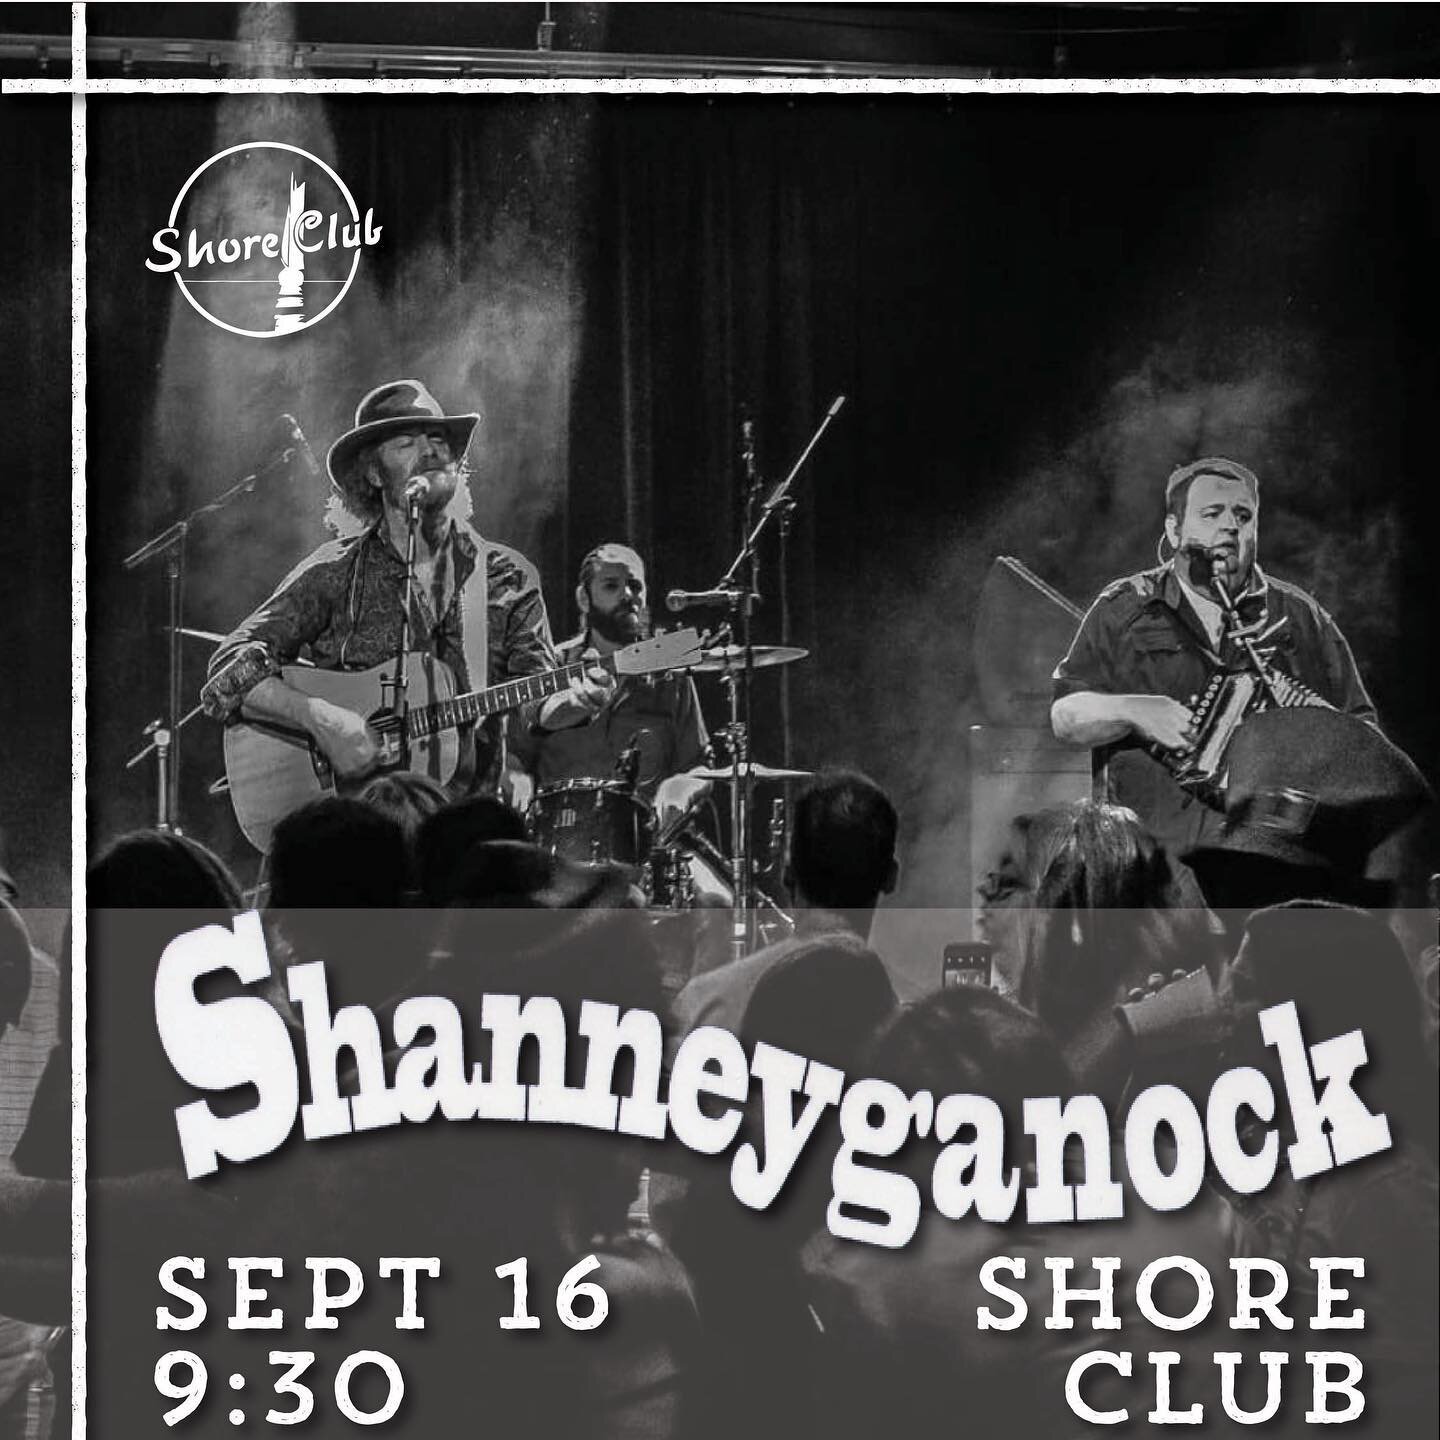 Shanneyganock is back by popular demand! B&rsquo;ys tell you buds how good Newfoundland&rsquo;s greatest export are live. One night only Sept 16, 9:30, 19+
Tickets 🎫 on sale May 3 at 12pm(noon) at www.shoreclub.ca
.
.
.
#shanneyganock #shoreclub #hu